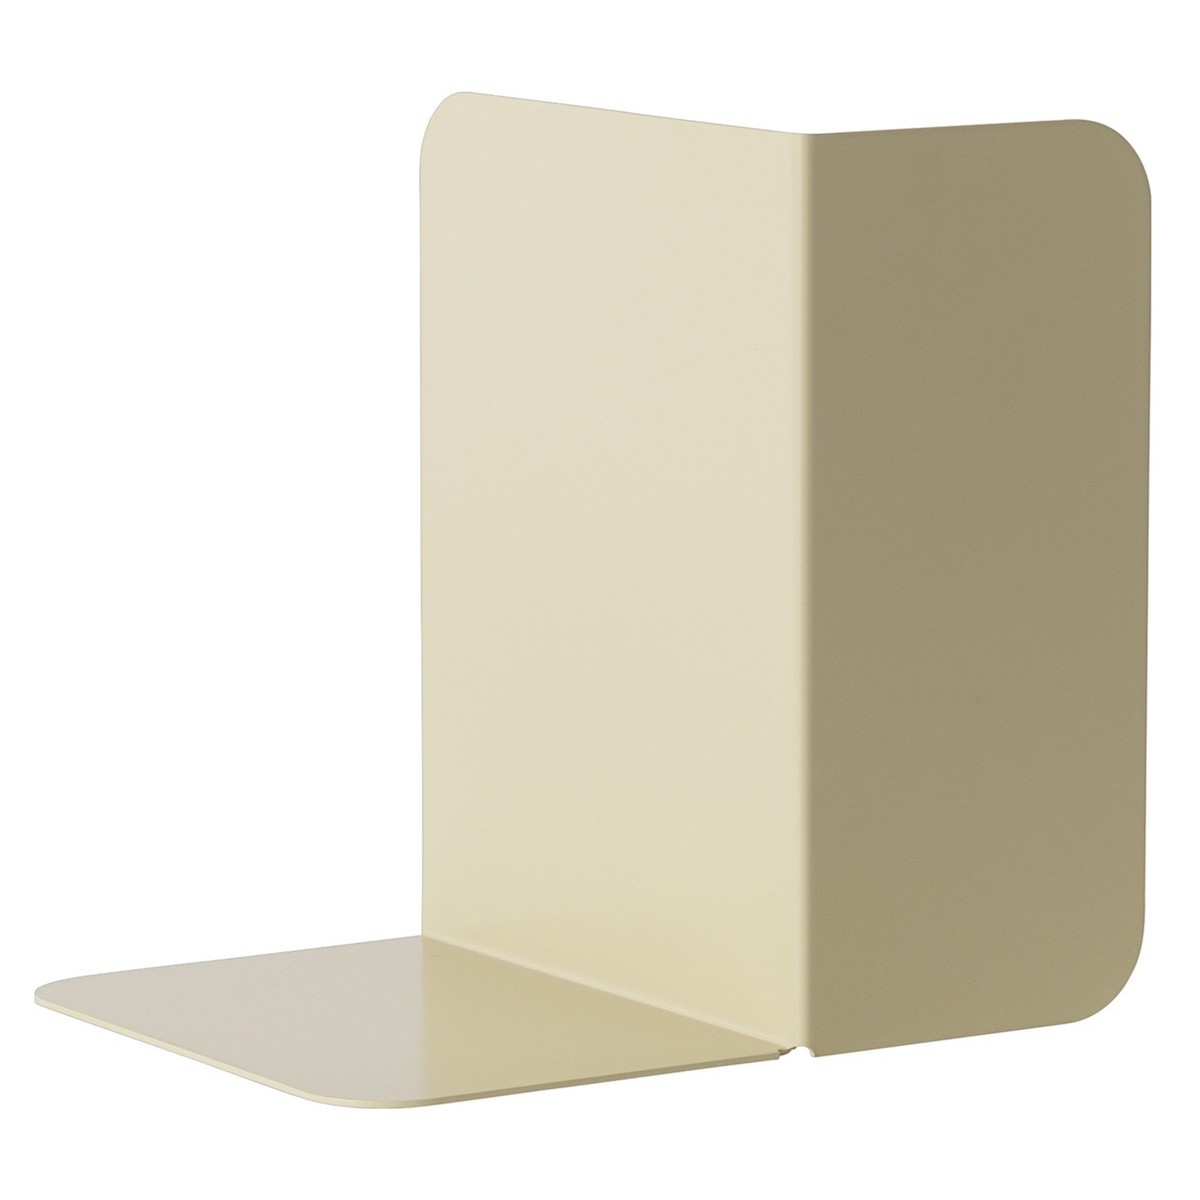 green-beige - Compile bookend